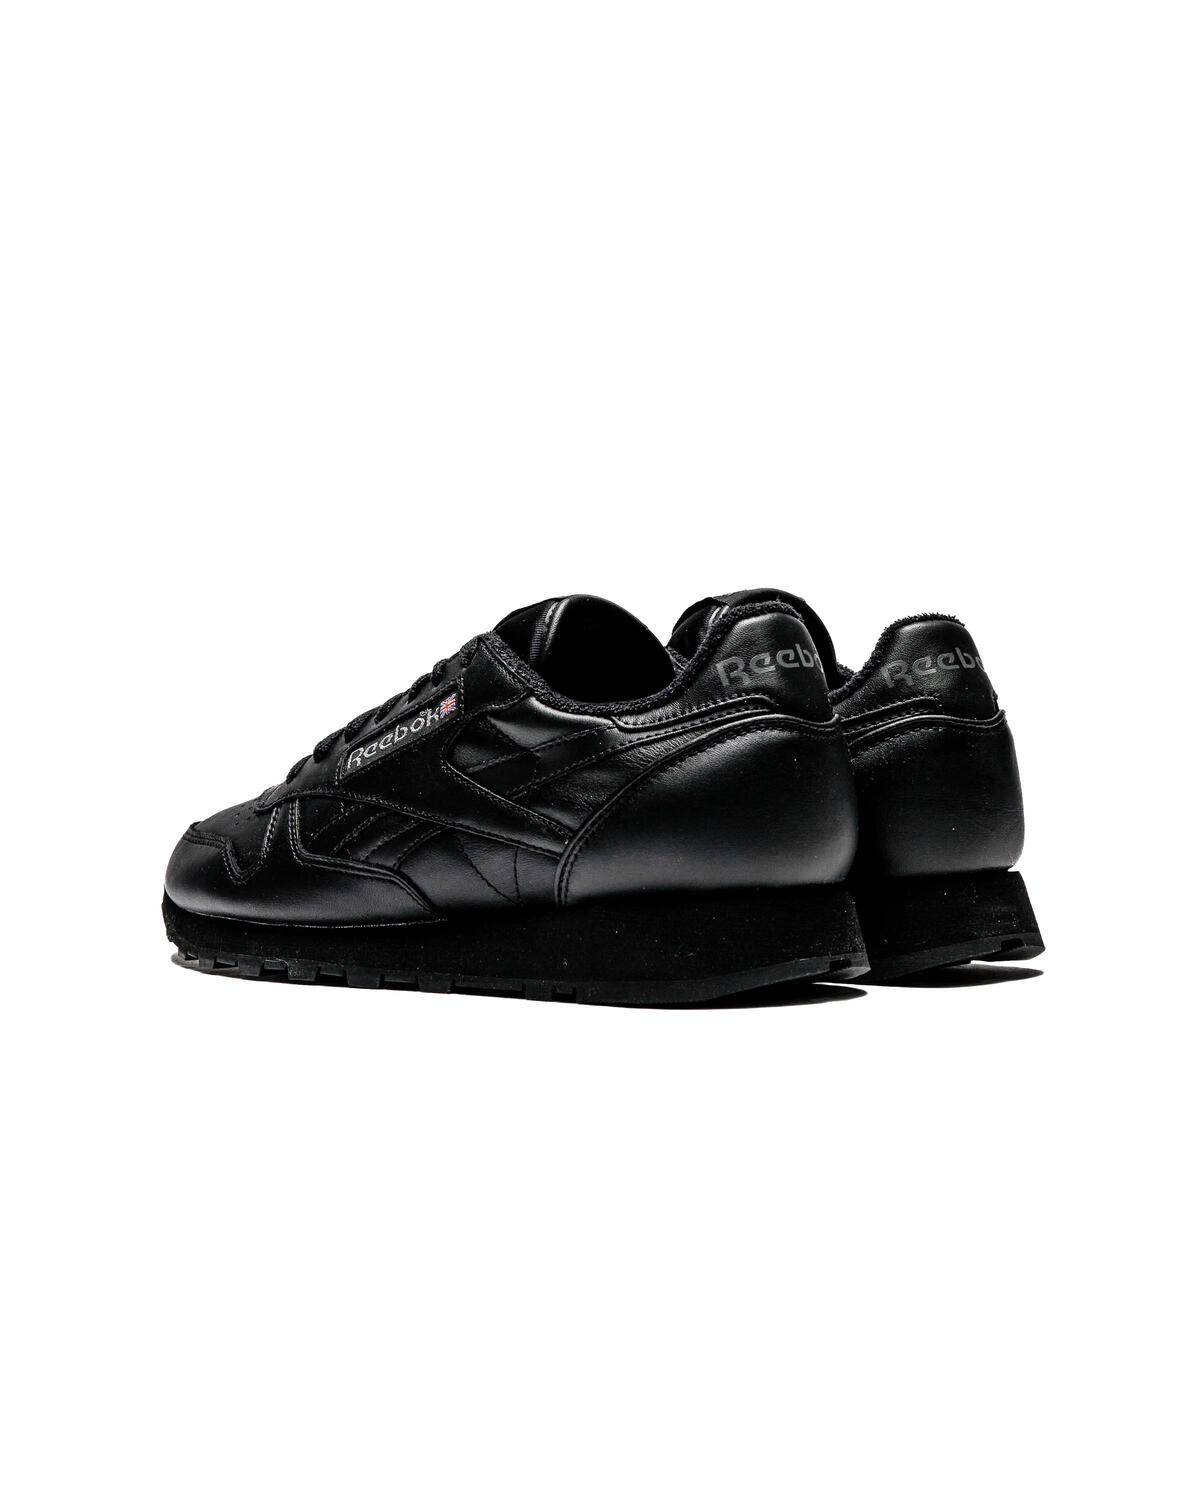 Reebok Classic Leather Vintage 40th - Black - GY9878